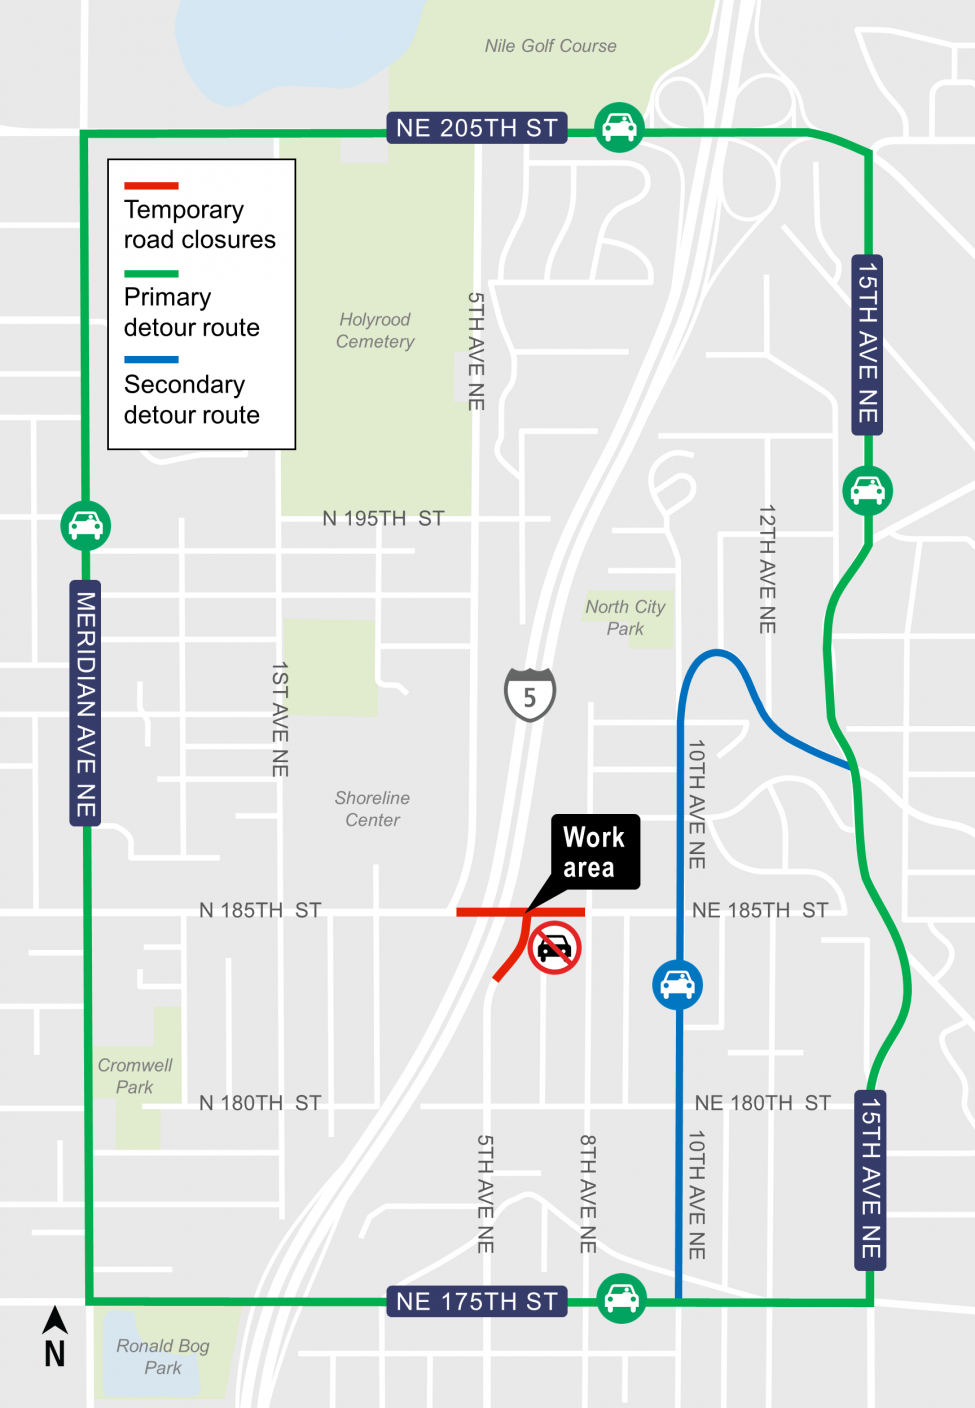 Map showing road closures and lane reductions on Northeast 185th Street from 5th Avenue to Northeast 185th Street near Shoreline Stadium.